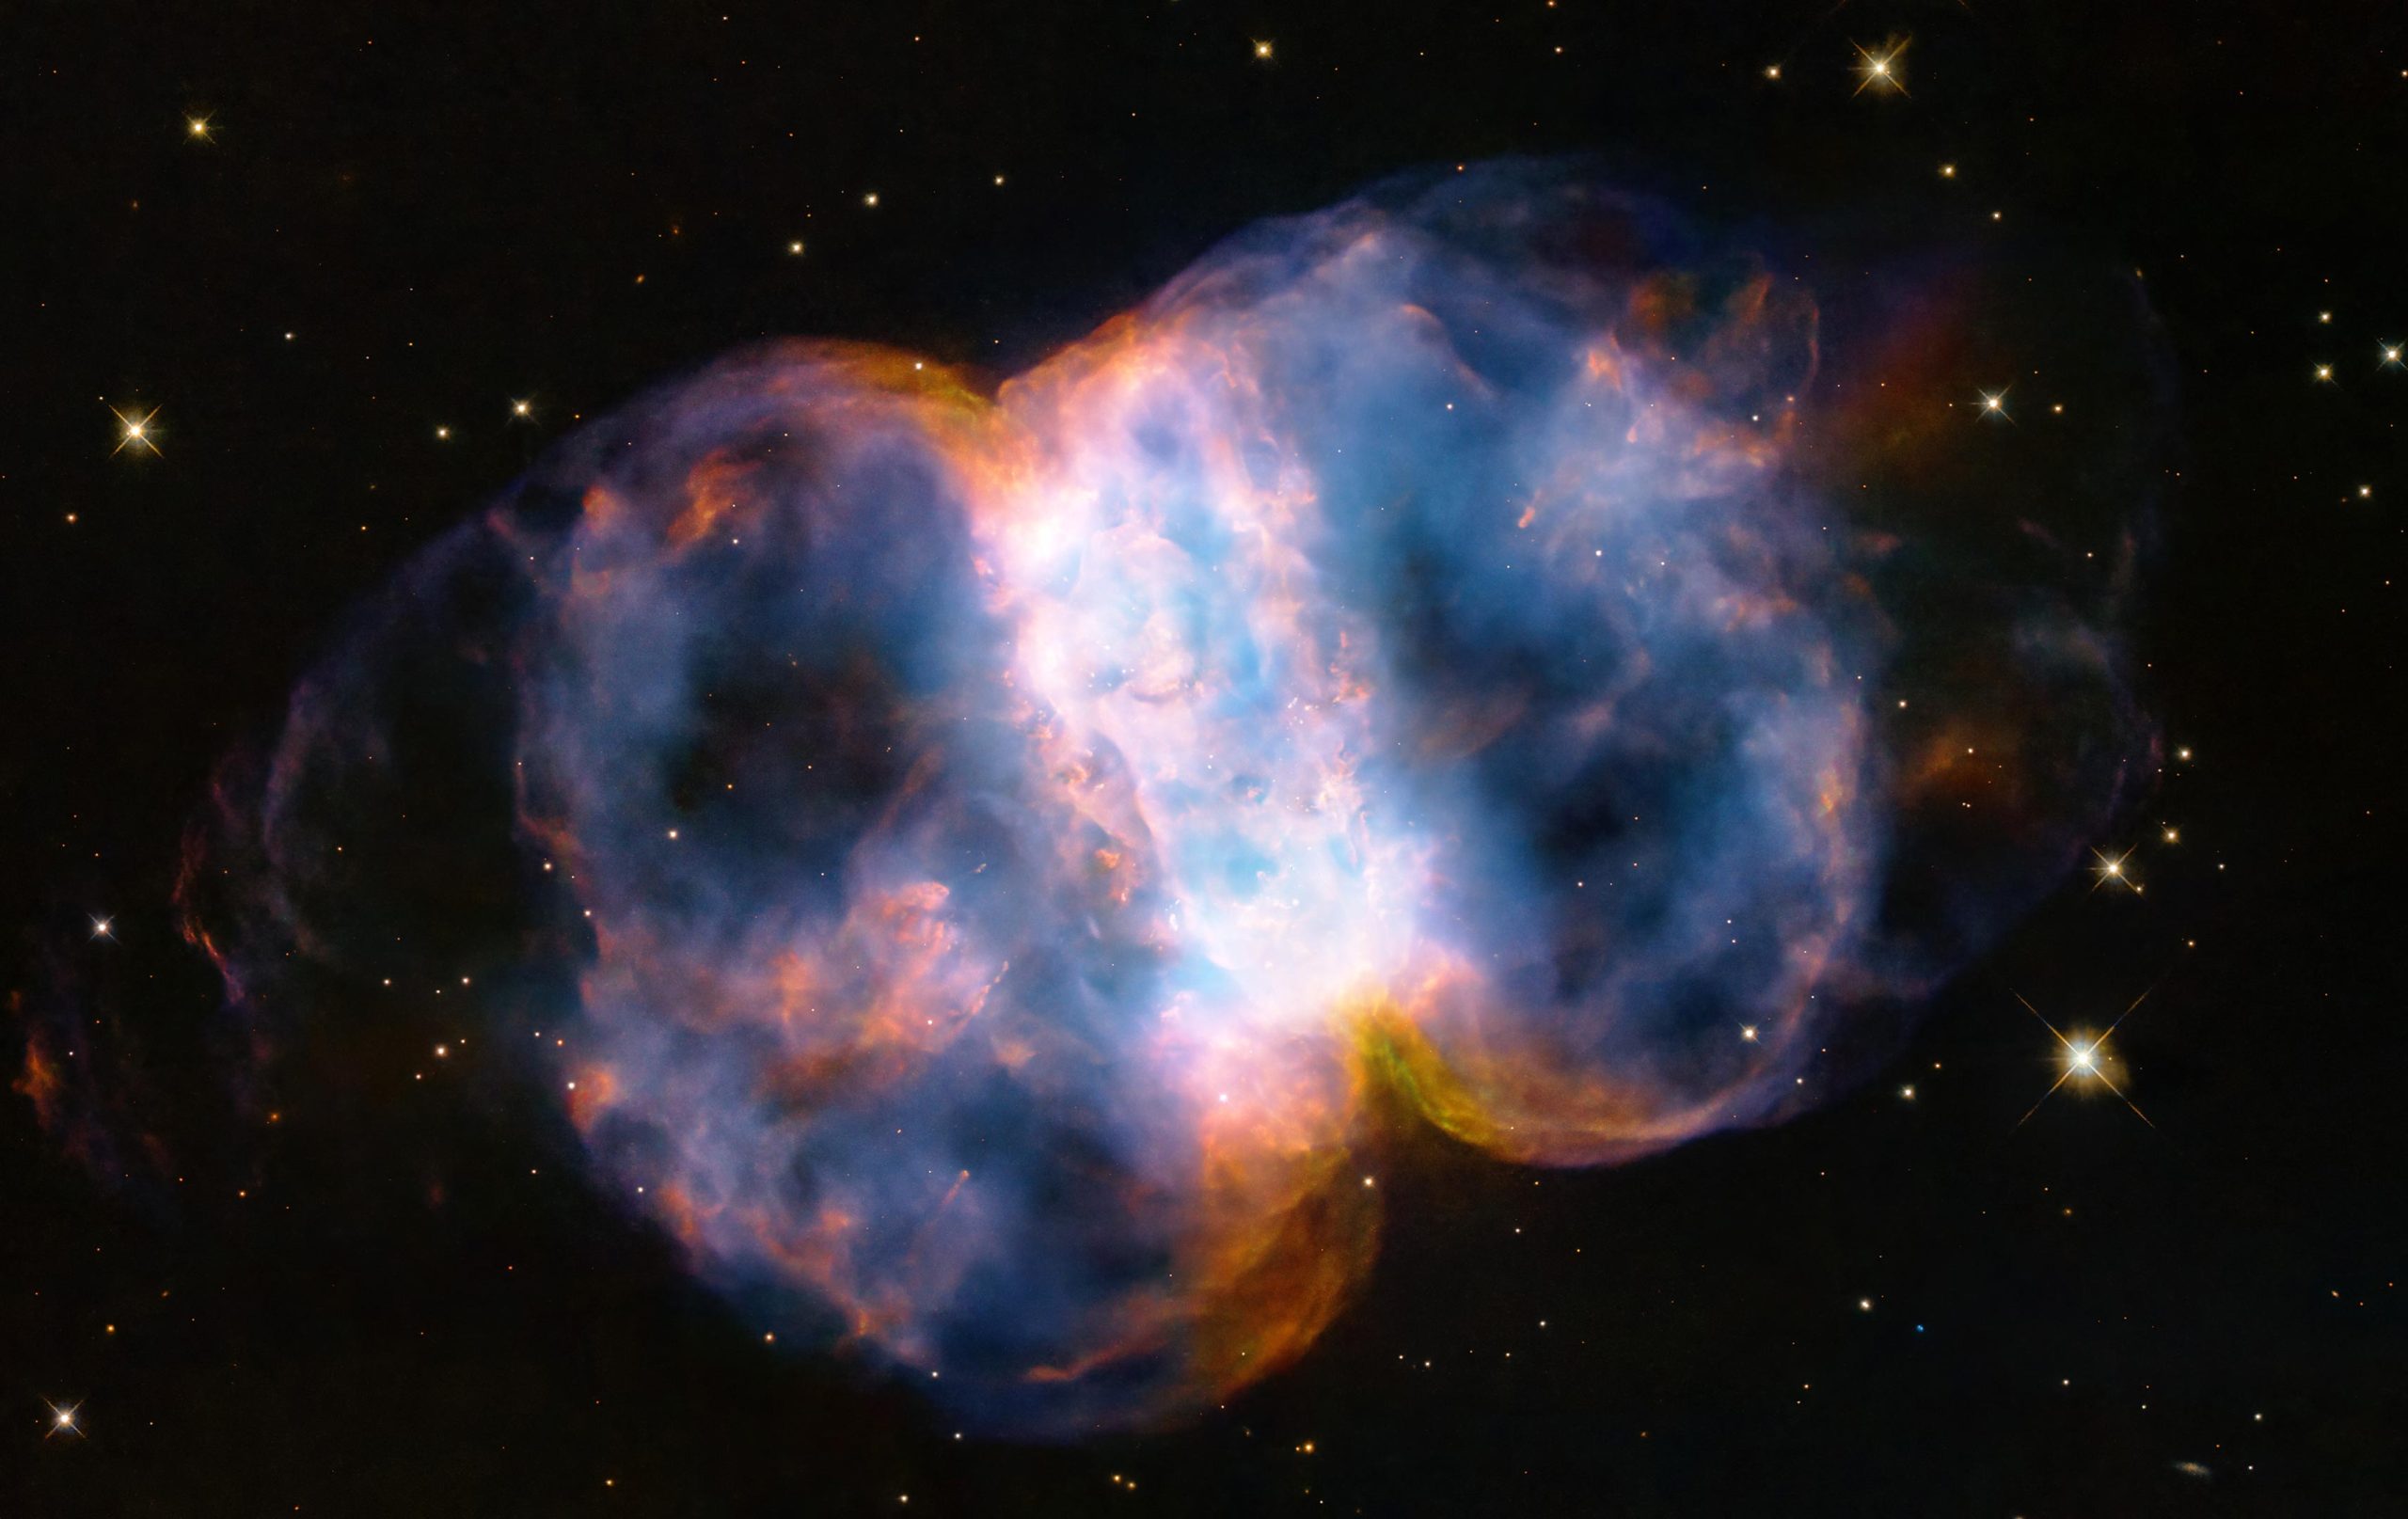 Hubble celebrates its 34th anniversary with a stunning view of the Little Dumbbell Nebula